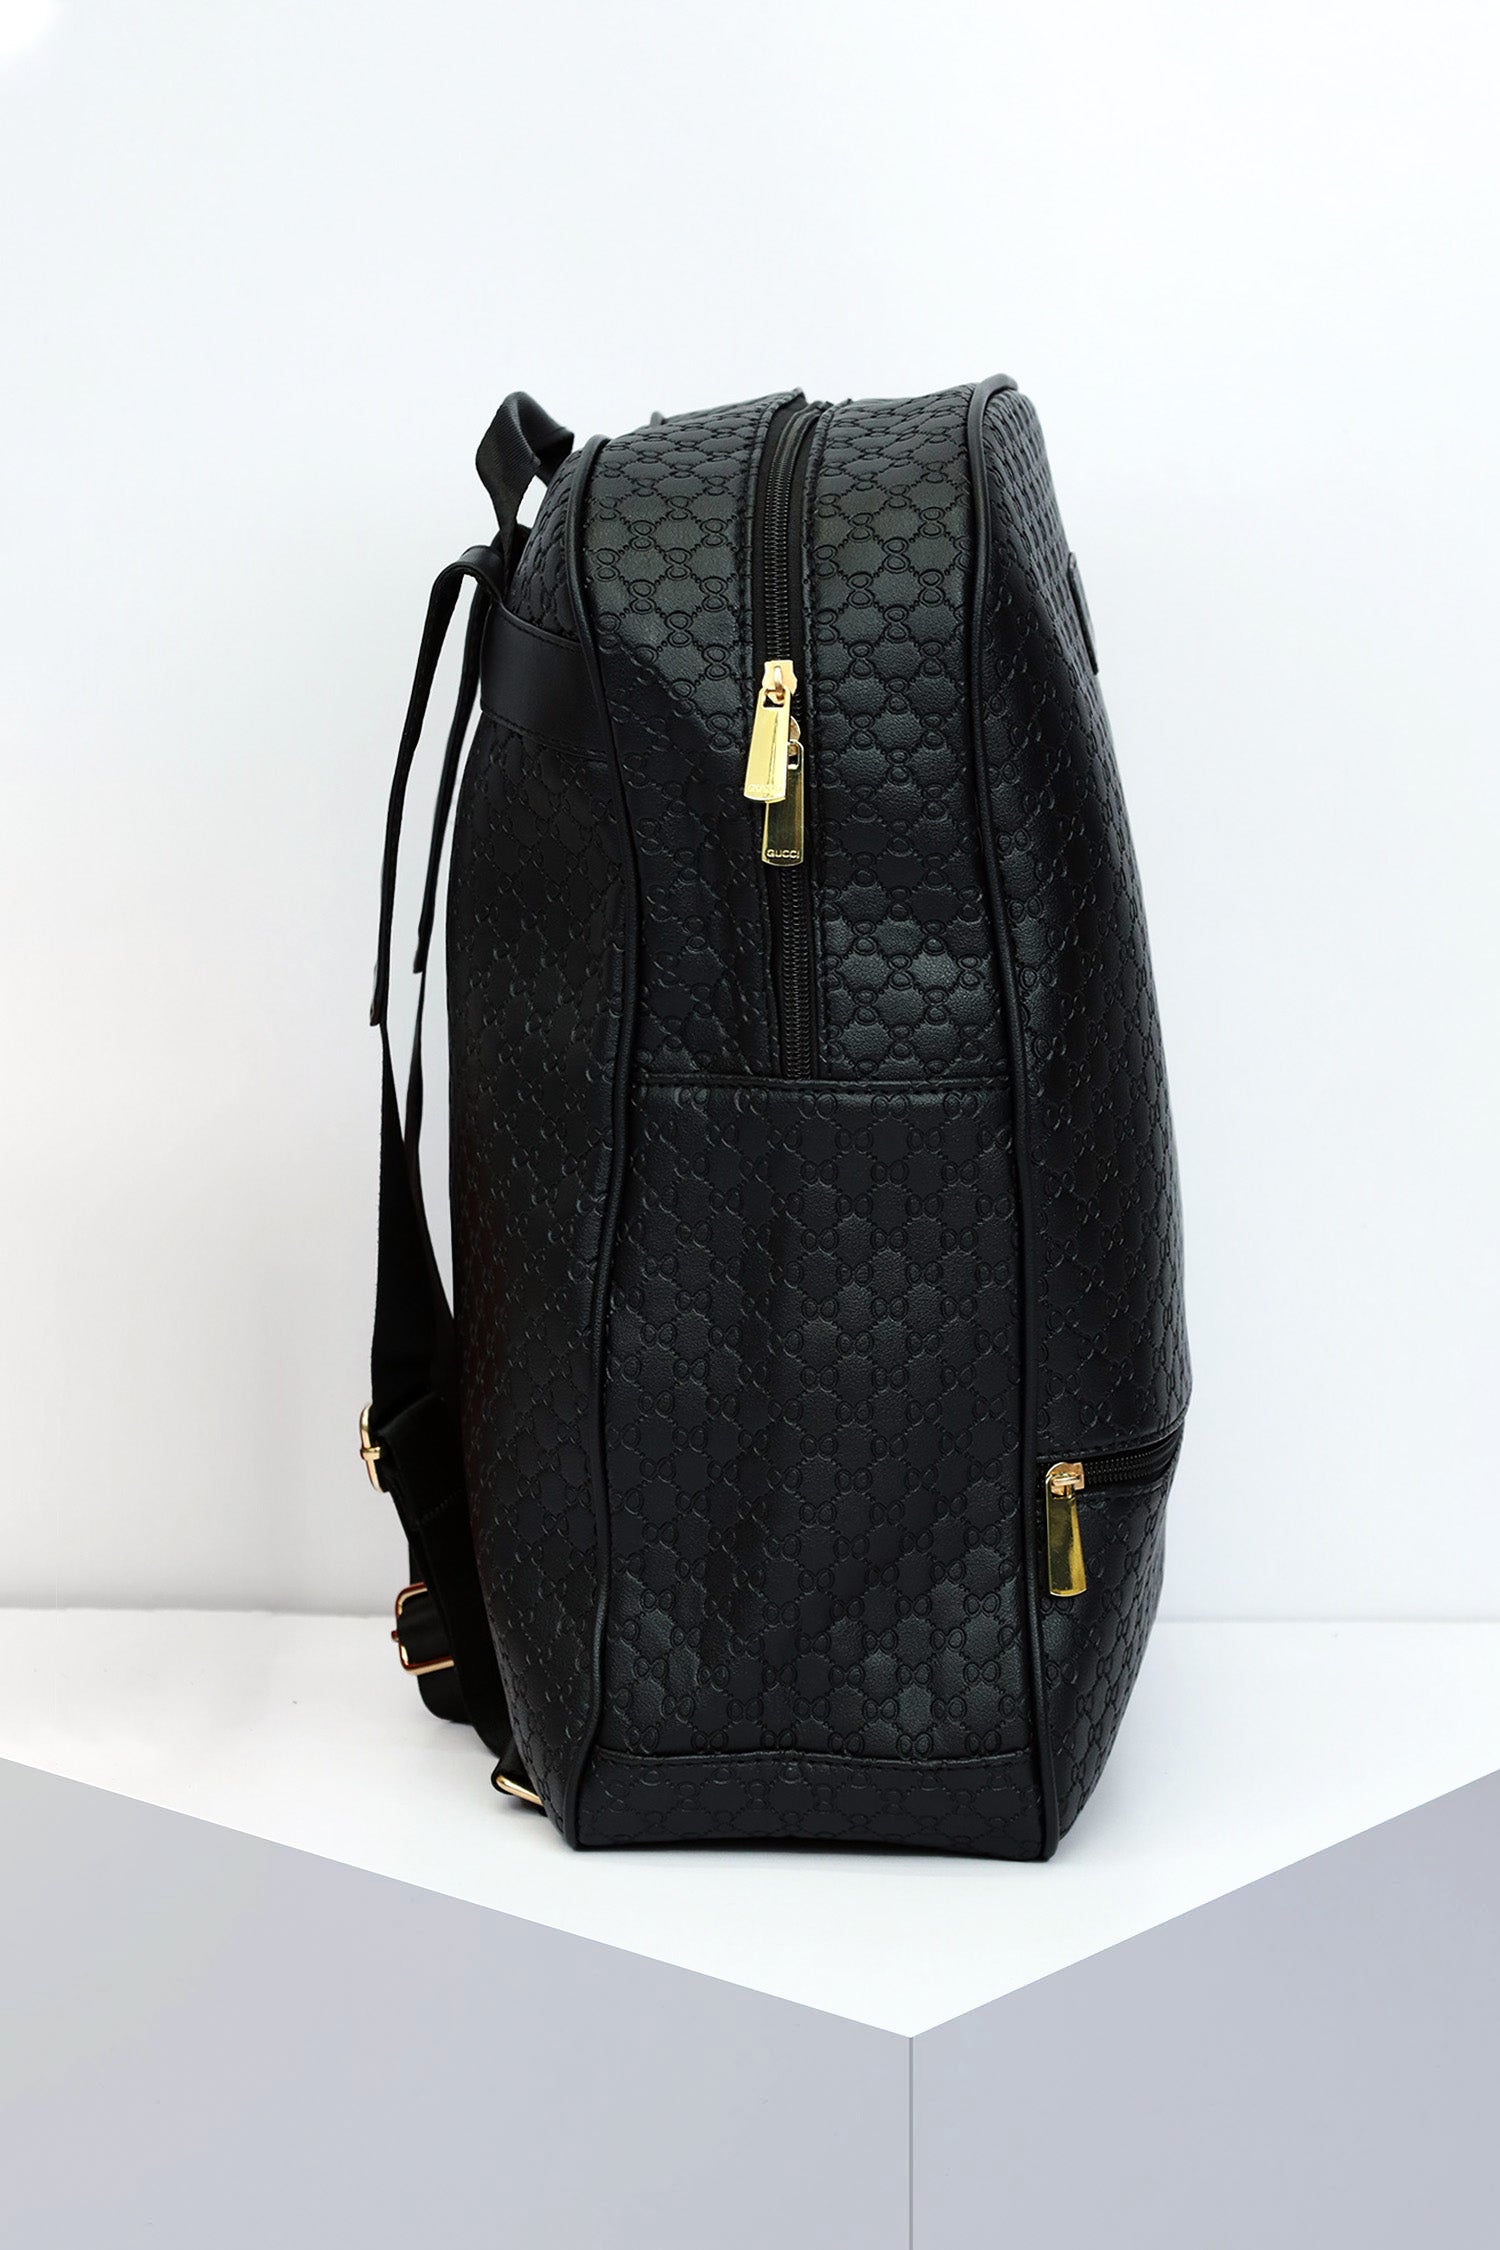 Guci Embossed Textured PU Leather Backpack in Black & Golden